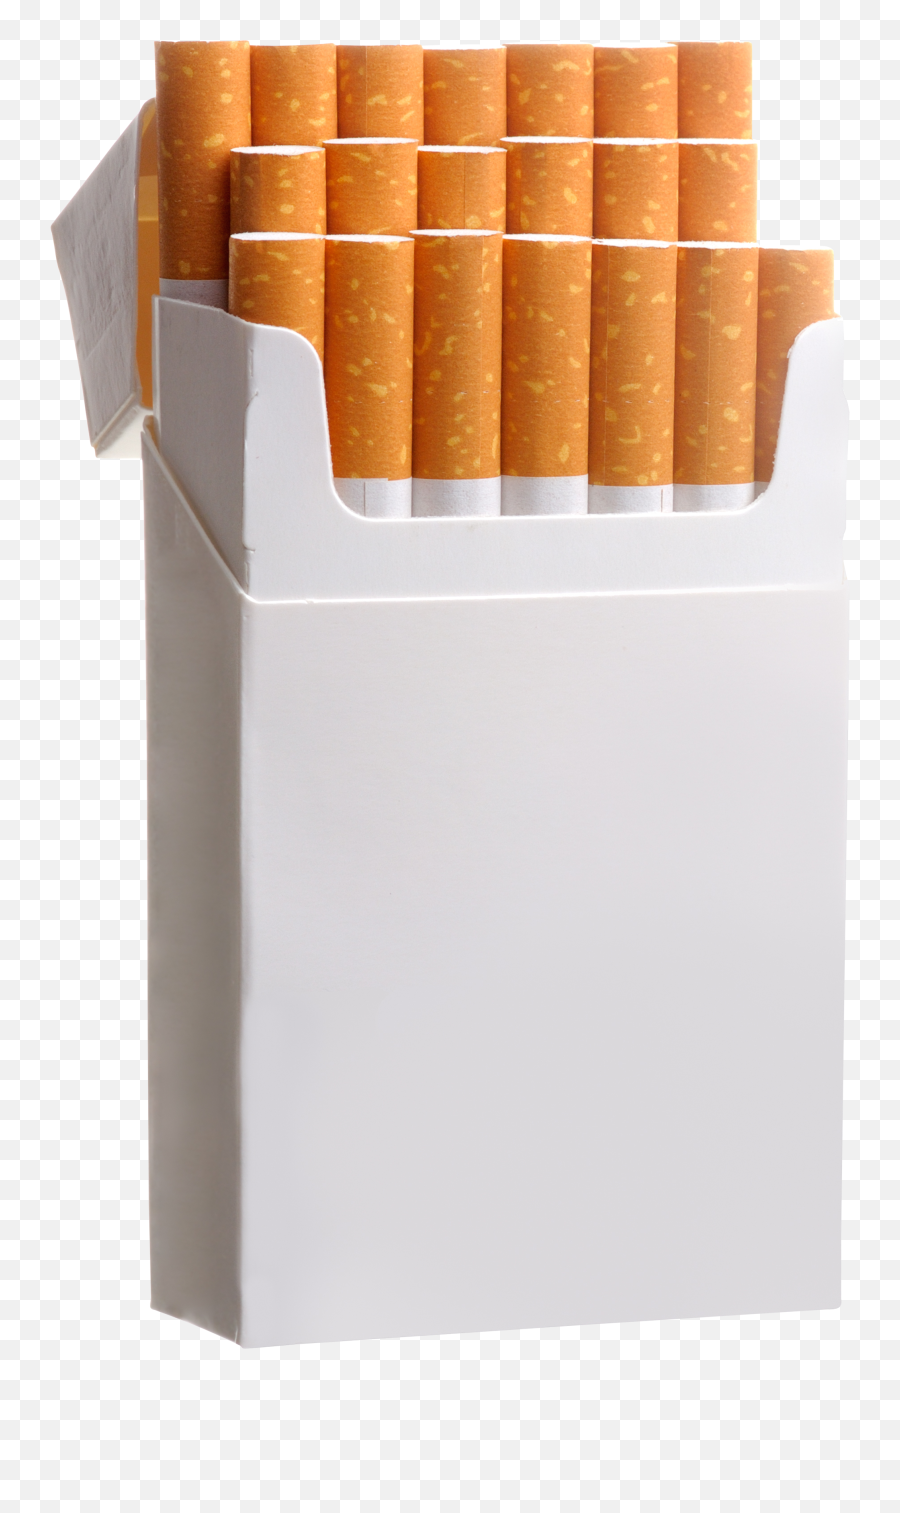 Freepngs - Cigarette Pack Png,Tobacco Png